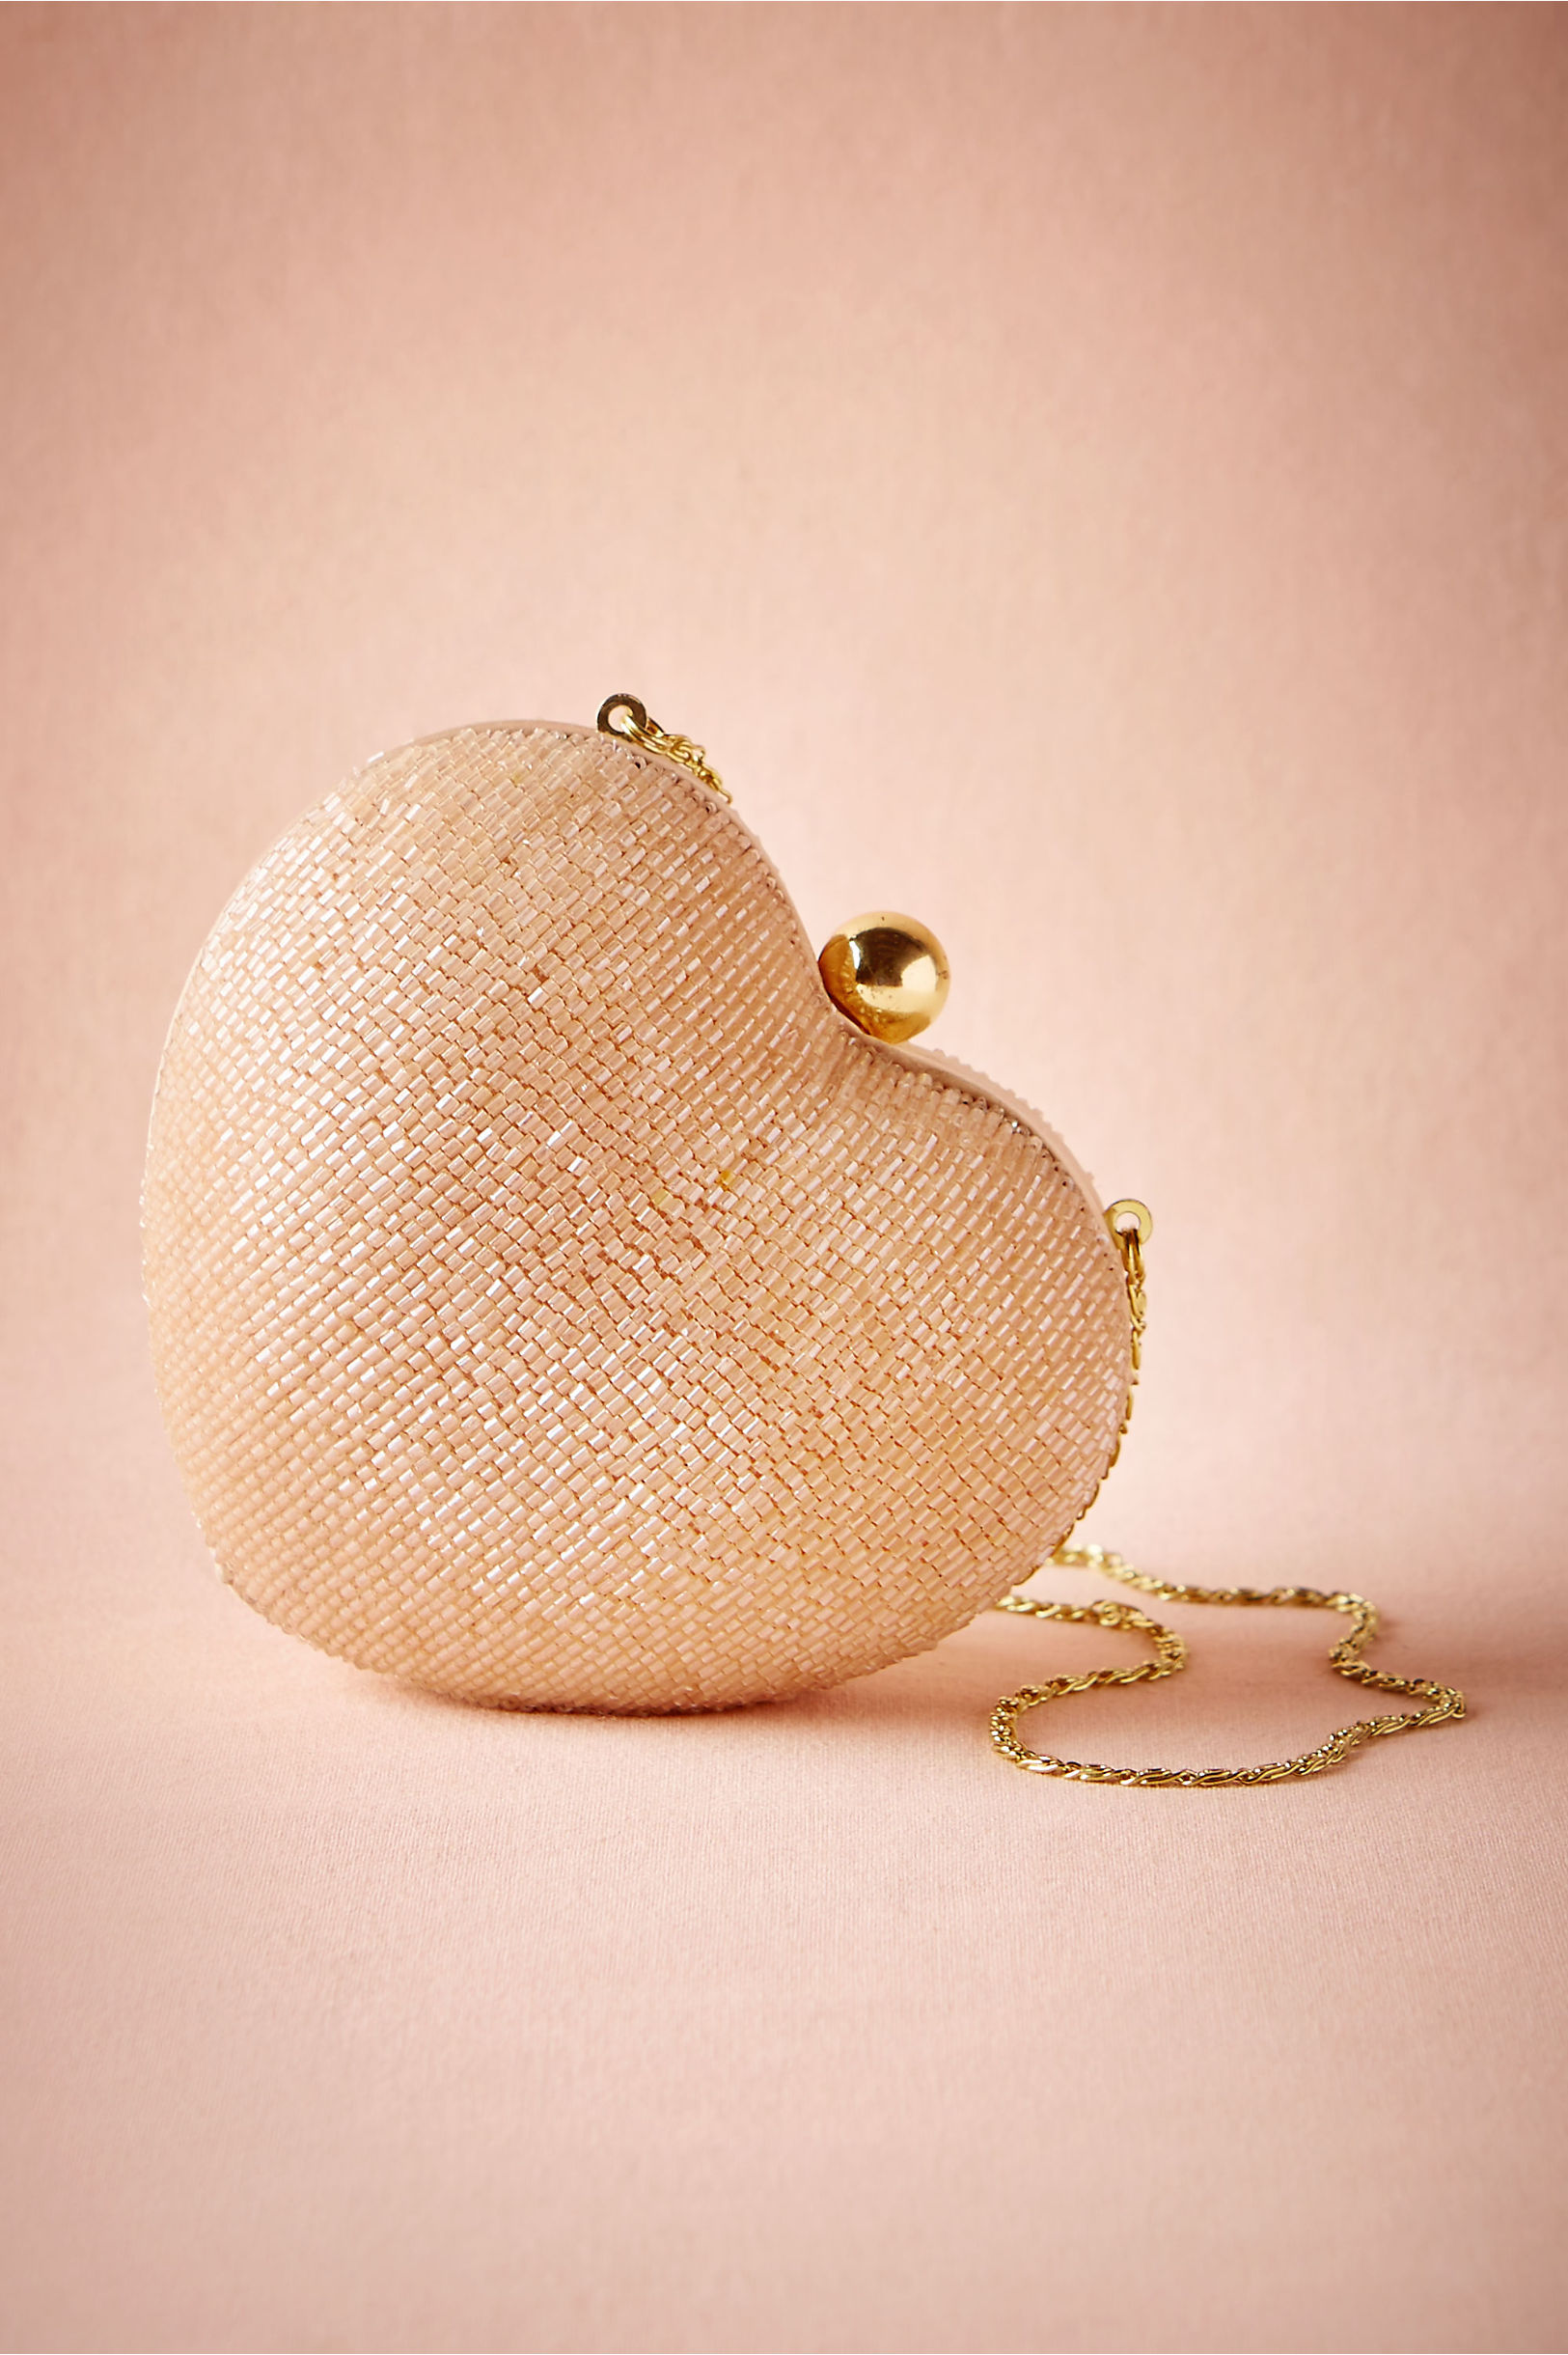 Blush Heart Clutch in Shoes & Accessories Clutches & Gloves at BHLDN